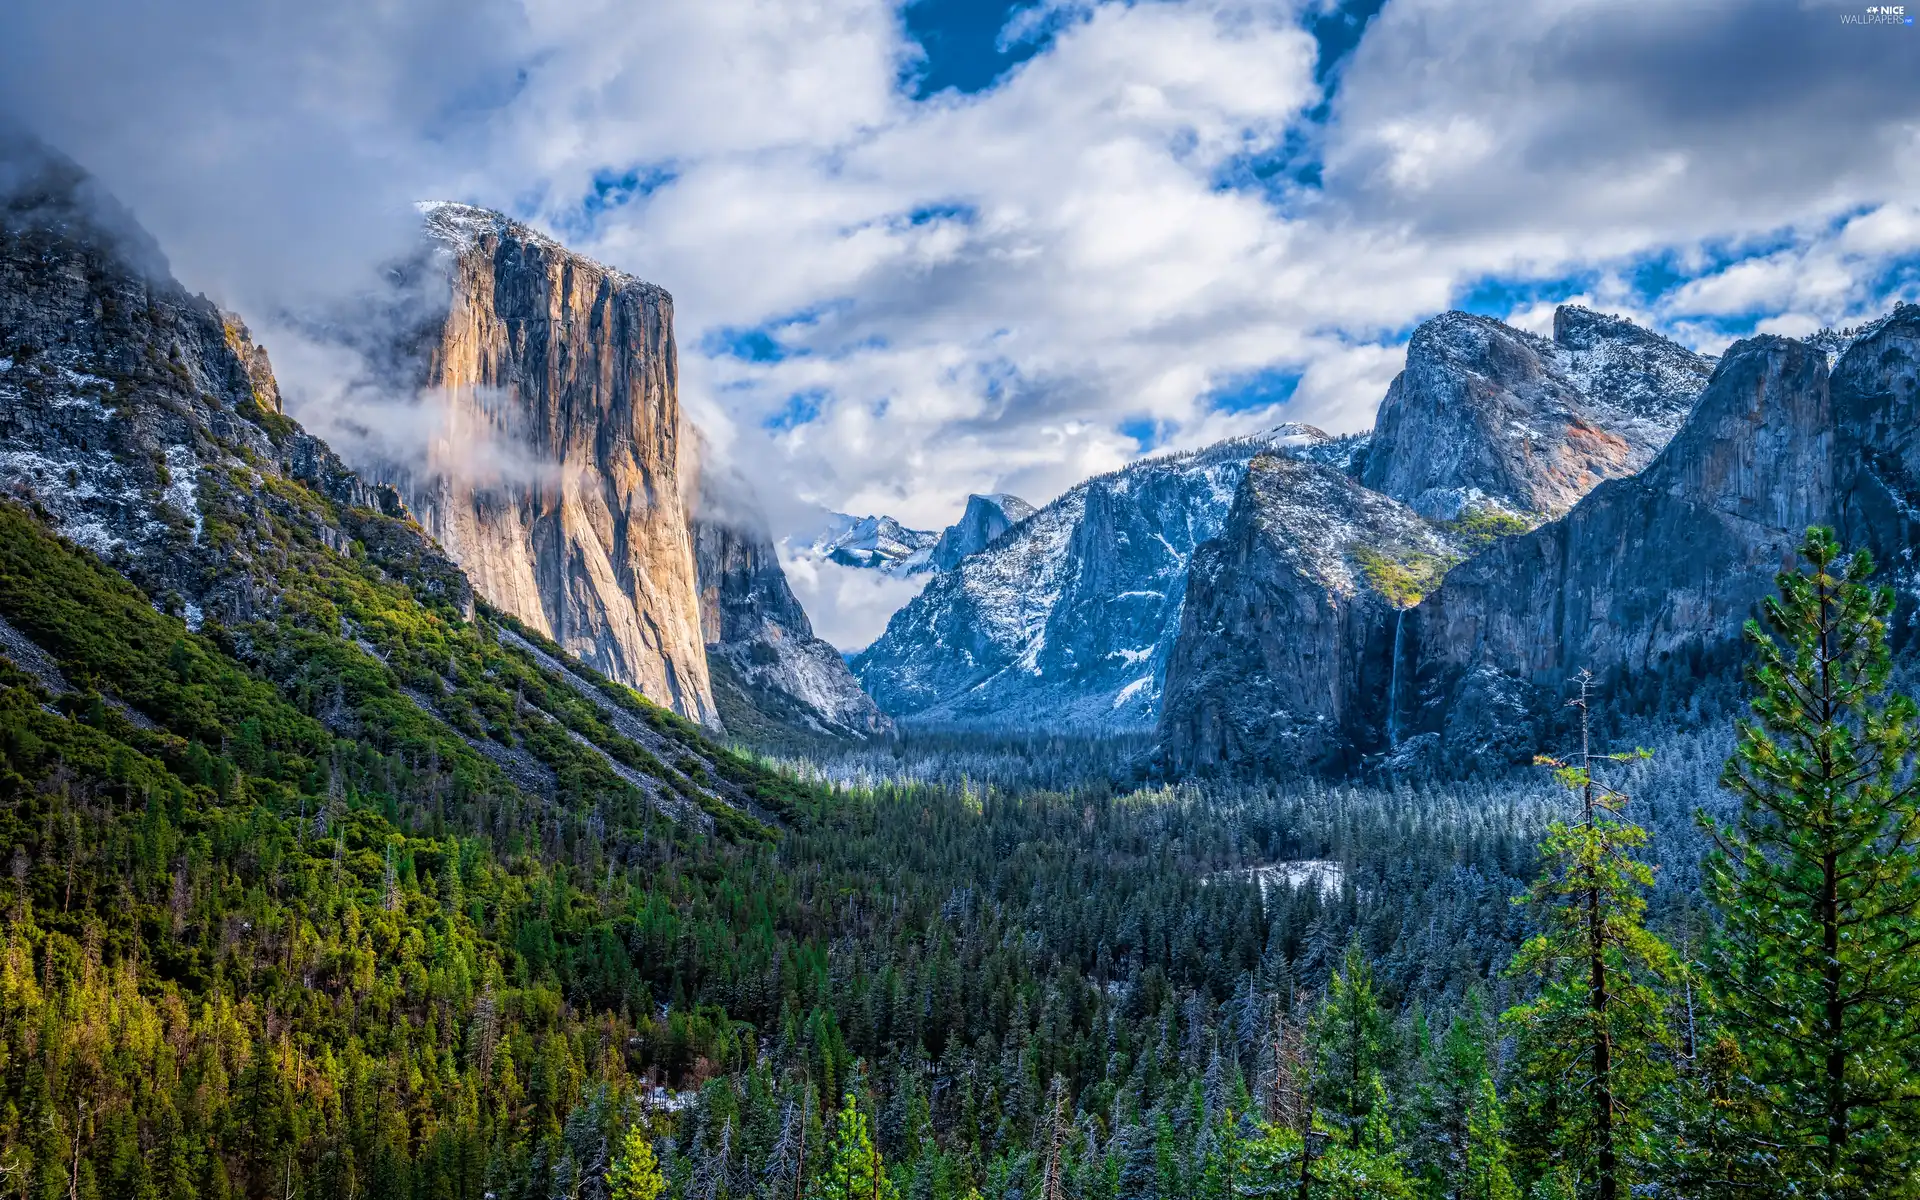 Sierra Nevada Mountains, California, clouds, Yosemite Valley, The United States, woods, Yosemite National Park